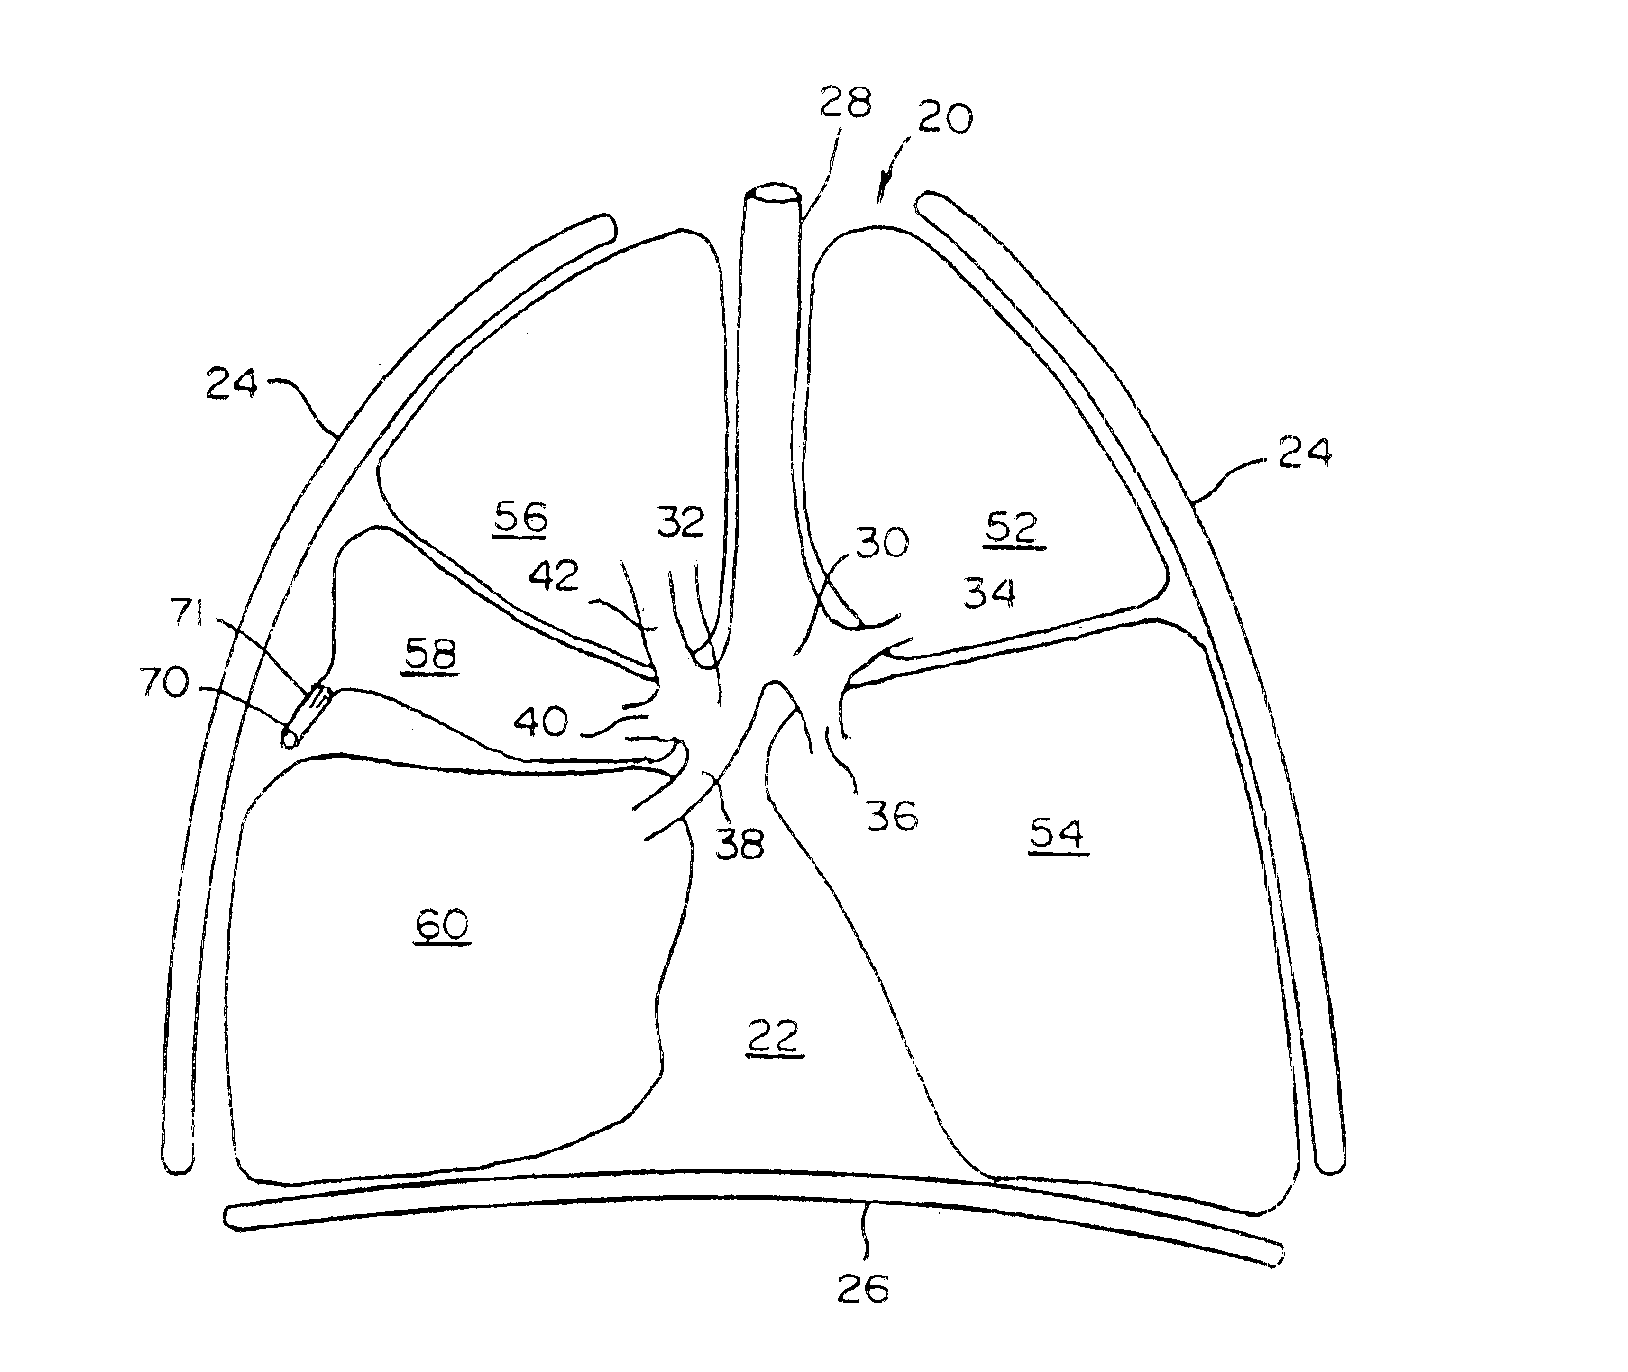 Constriction device viewable under X ray fluoroscopy